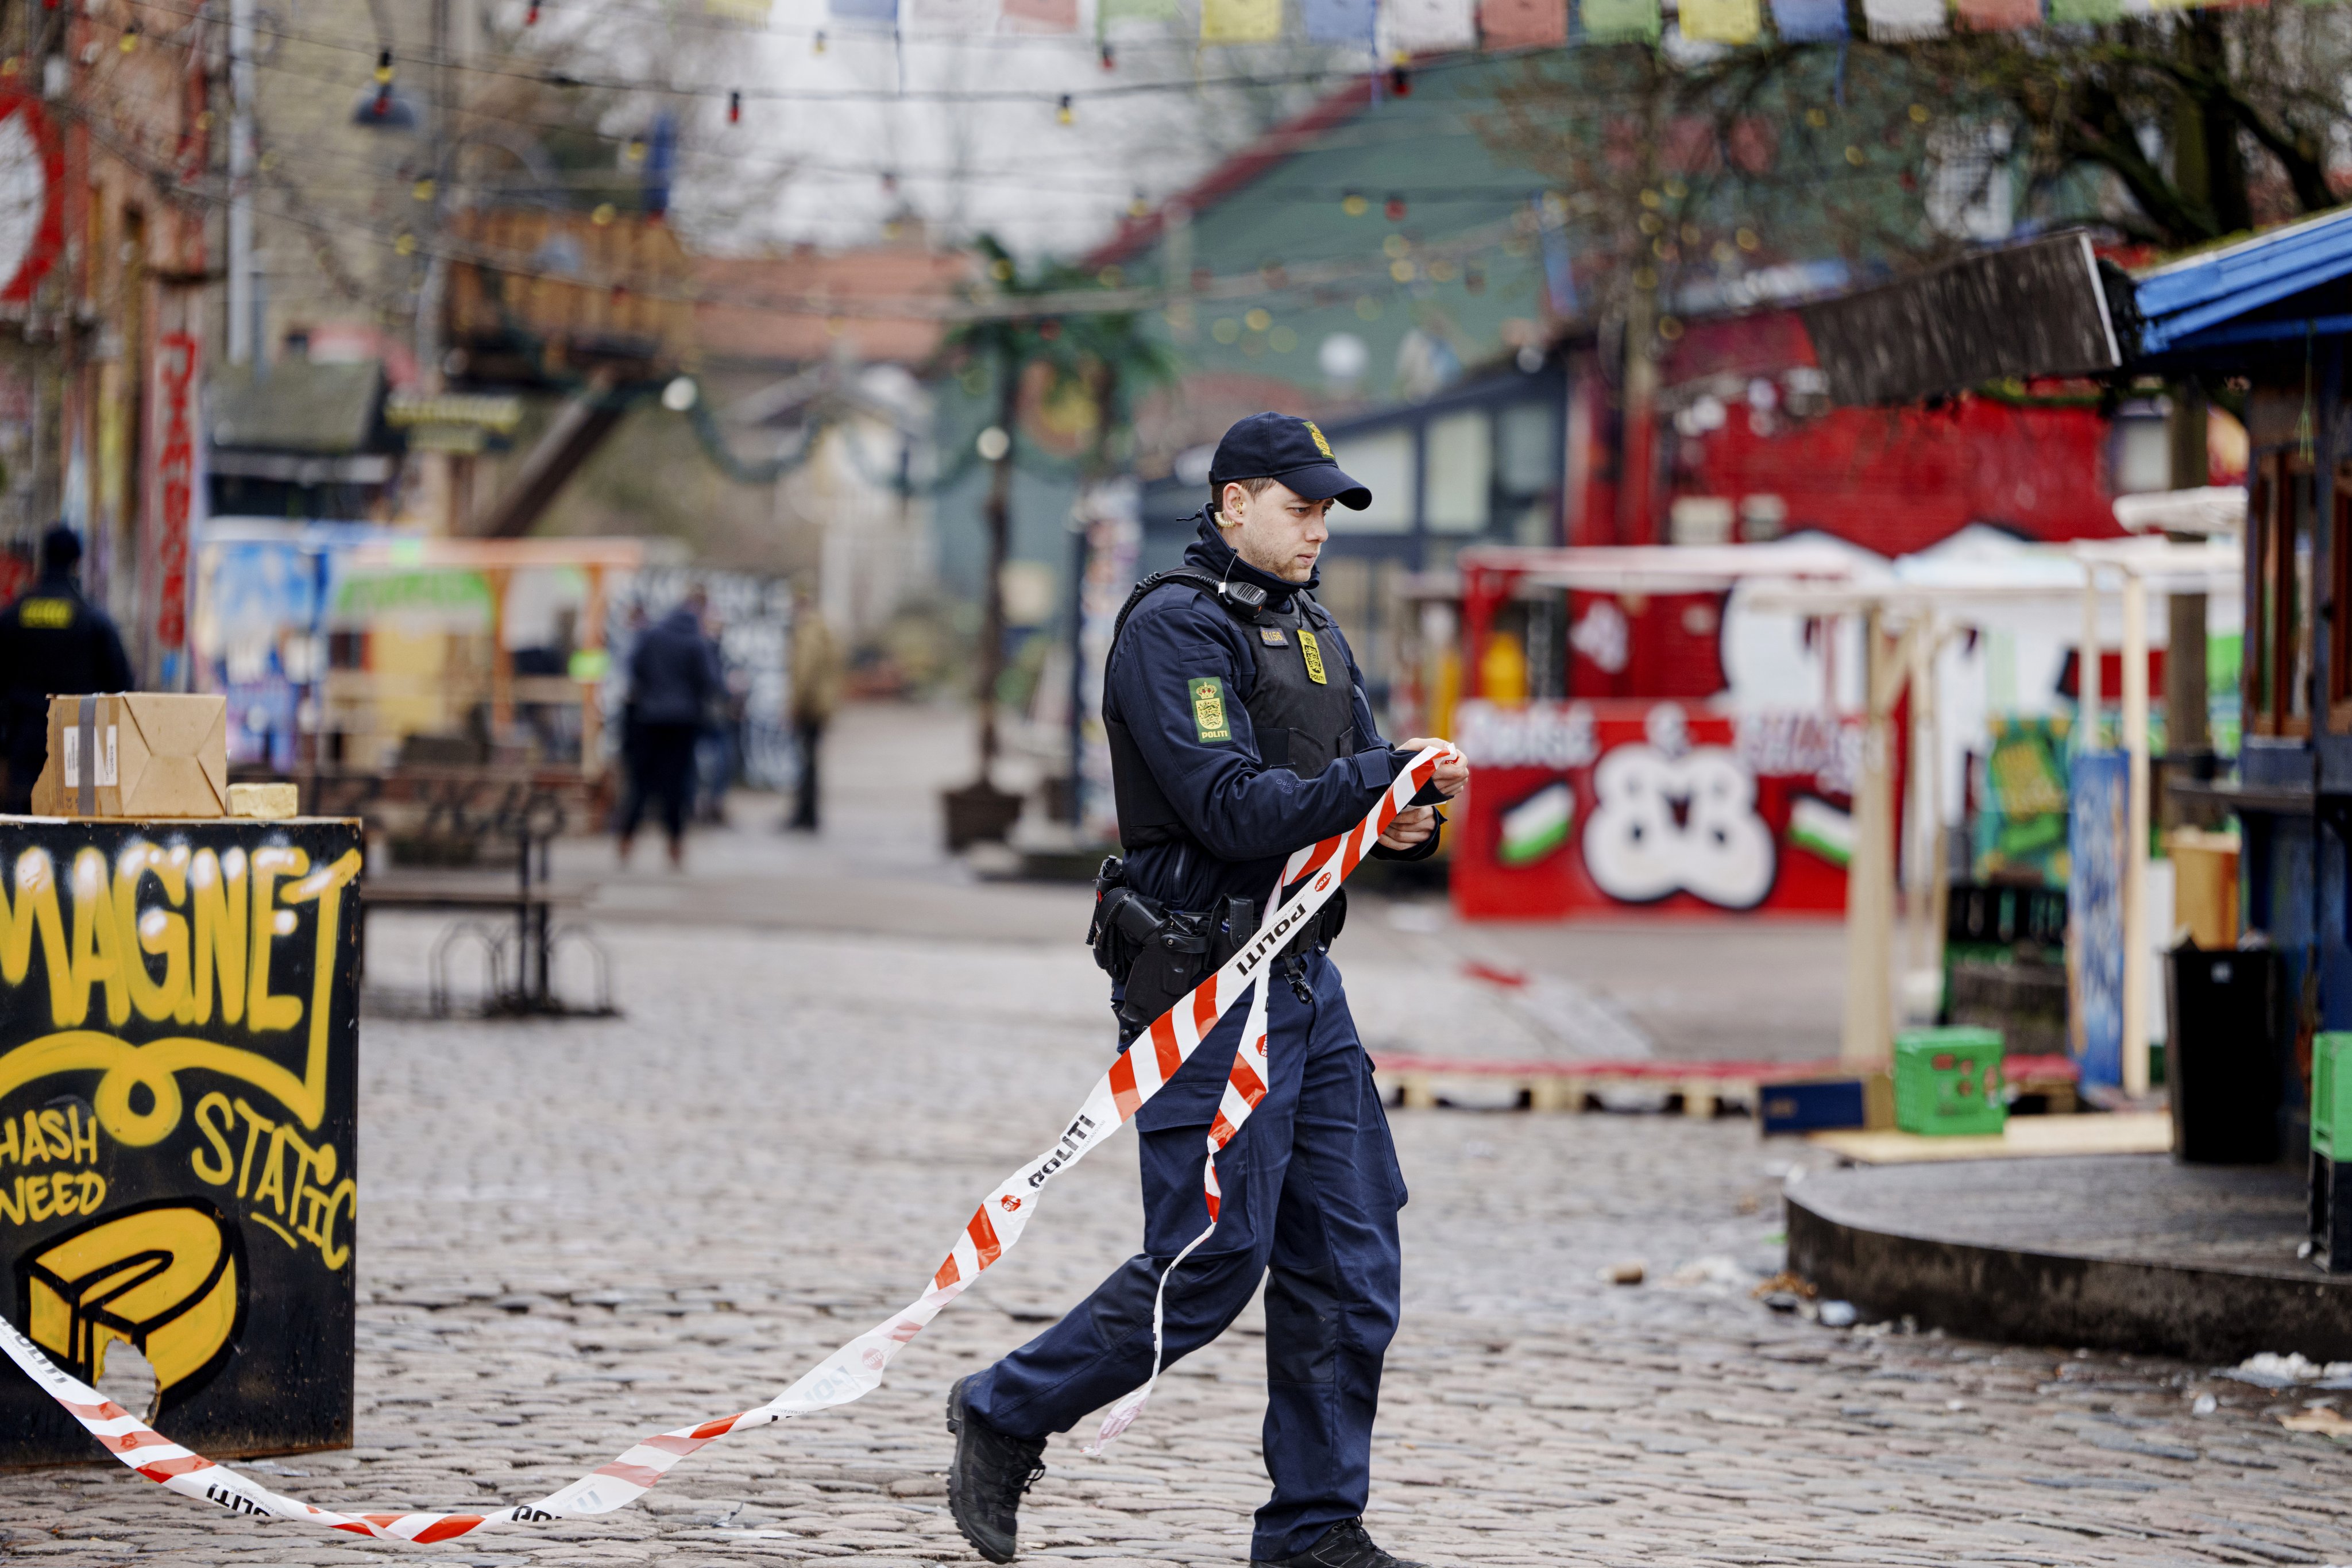 A police officer cordons off an area as part of closing down Pusher Street. Photo: EPA-EFE